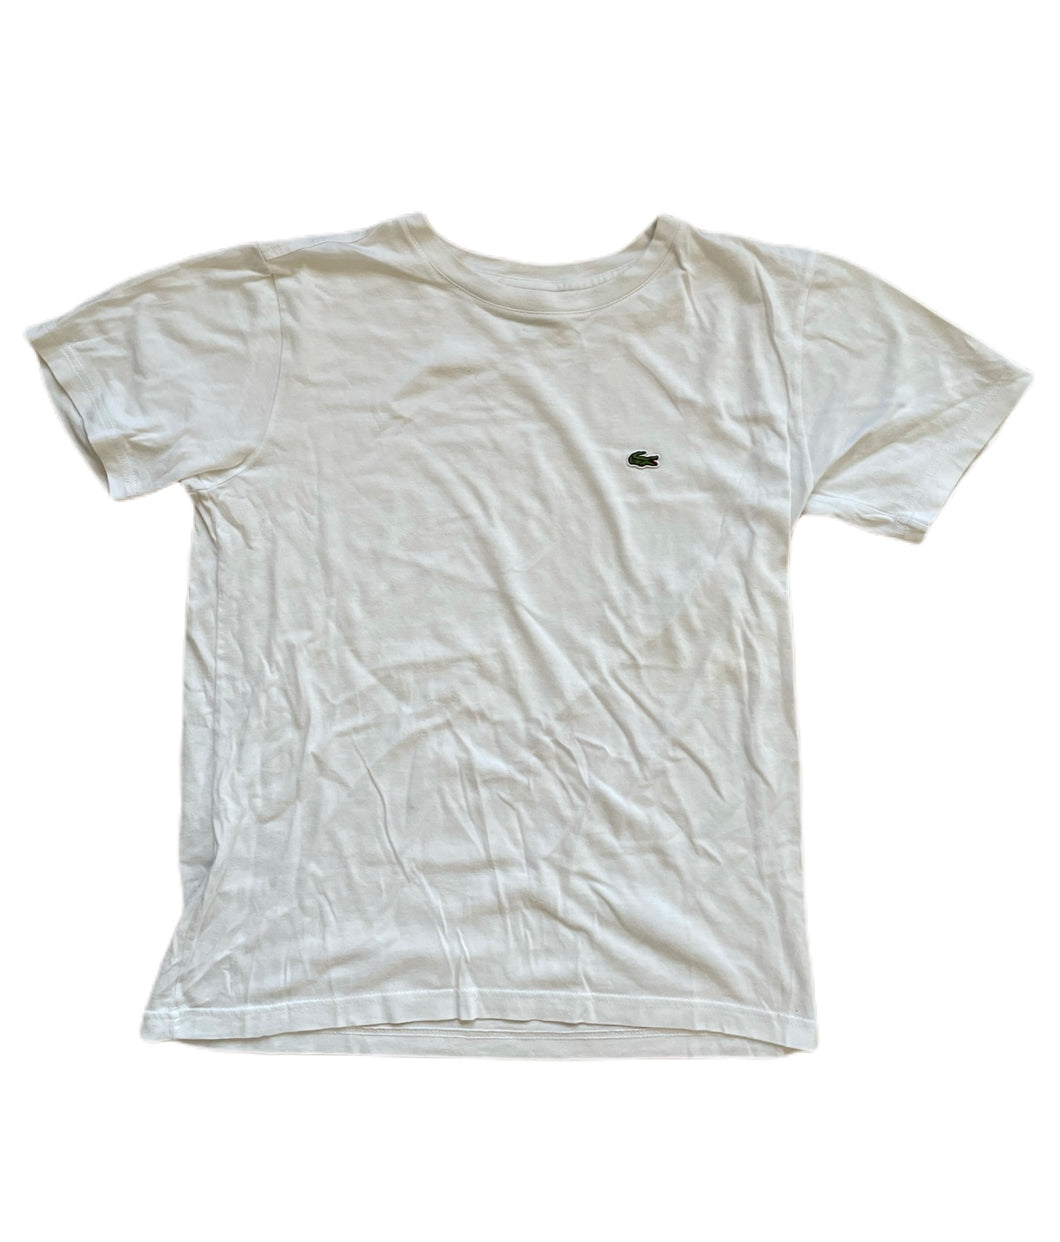 GS-Junior/Ladies White Lacoste T. Age 12-14, will fit UK 6-8.